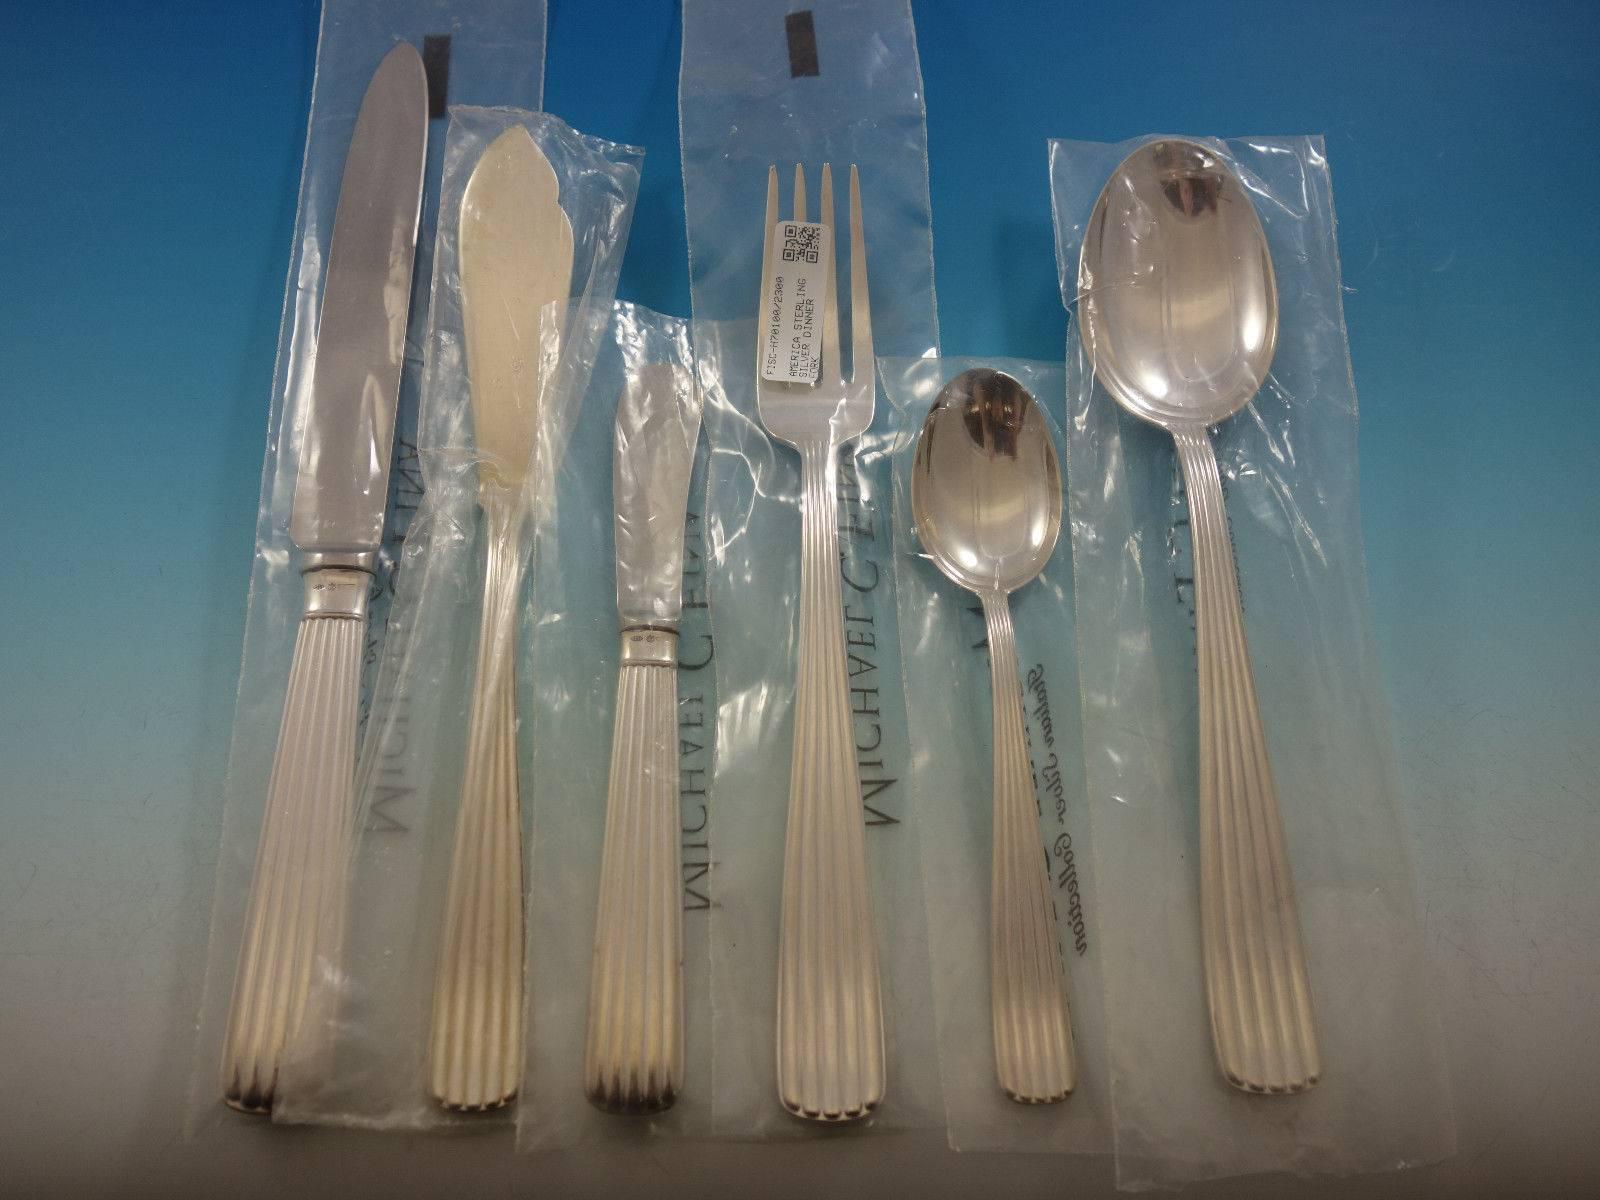 America by Schiavon, retailed by Michael C Fina, Italian sterling silver flatware set of 42 pieces. This set is in pristine, unused condition with most of the pieces still in the factory sleeves. This set includes: 

Six dinner size knives, 9 3/4